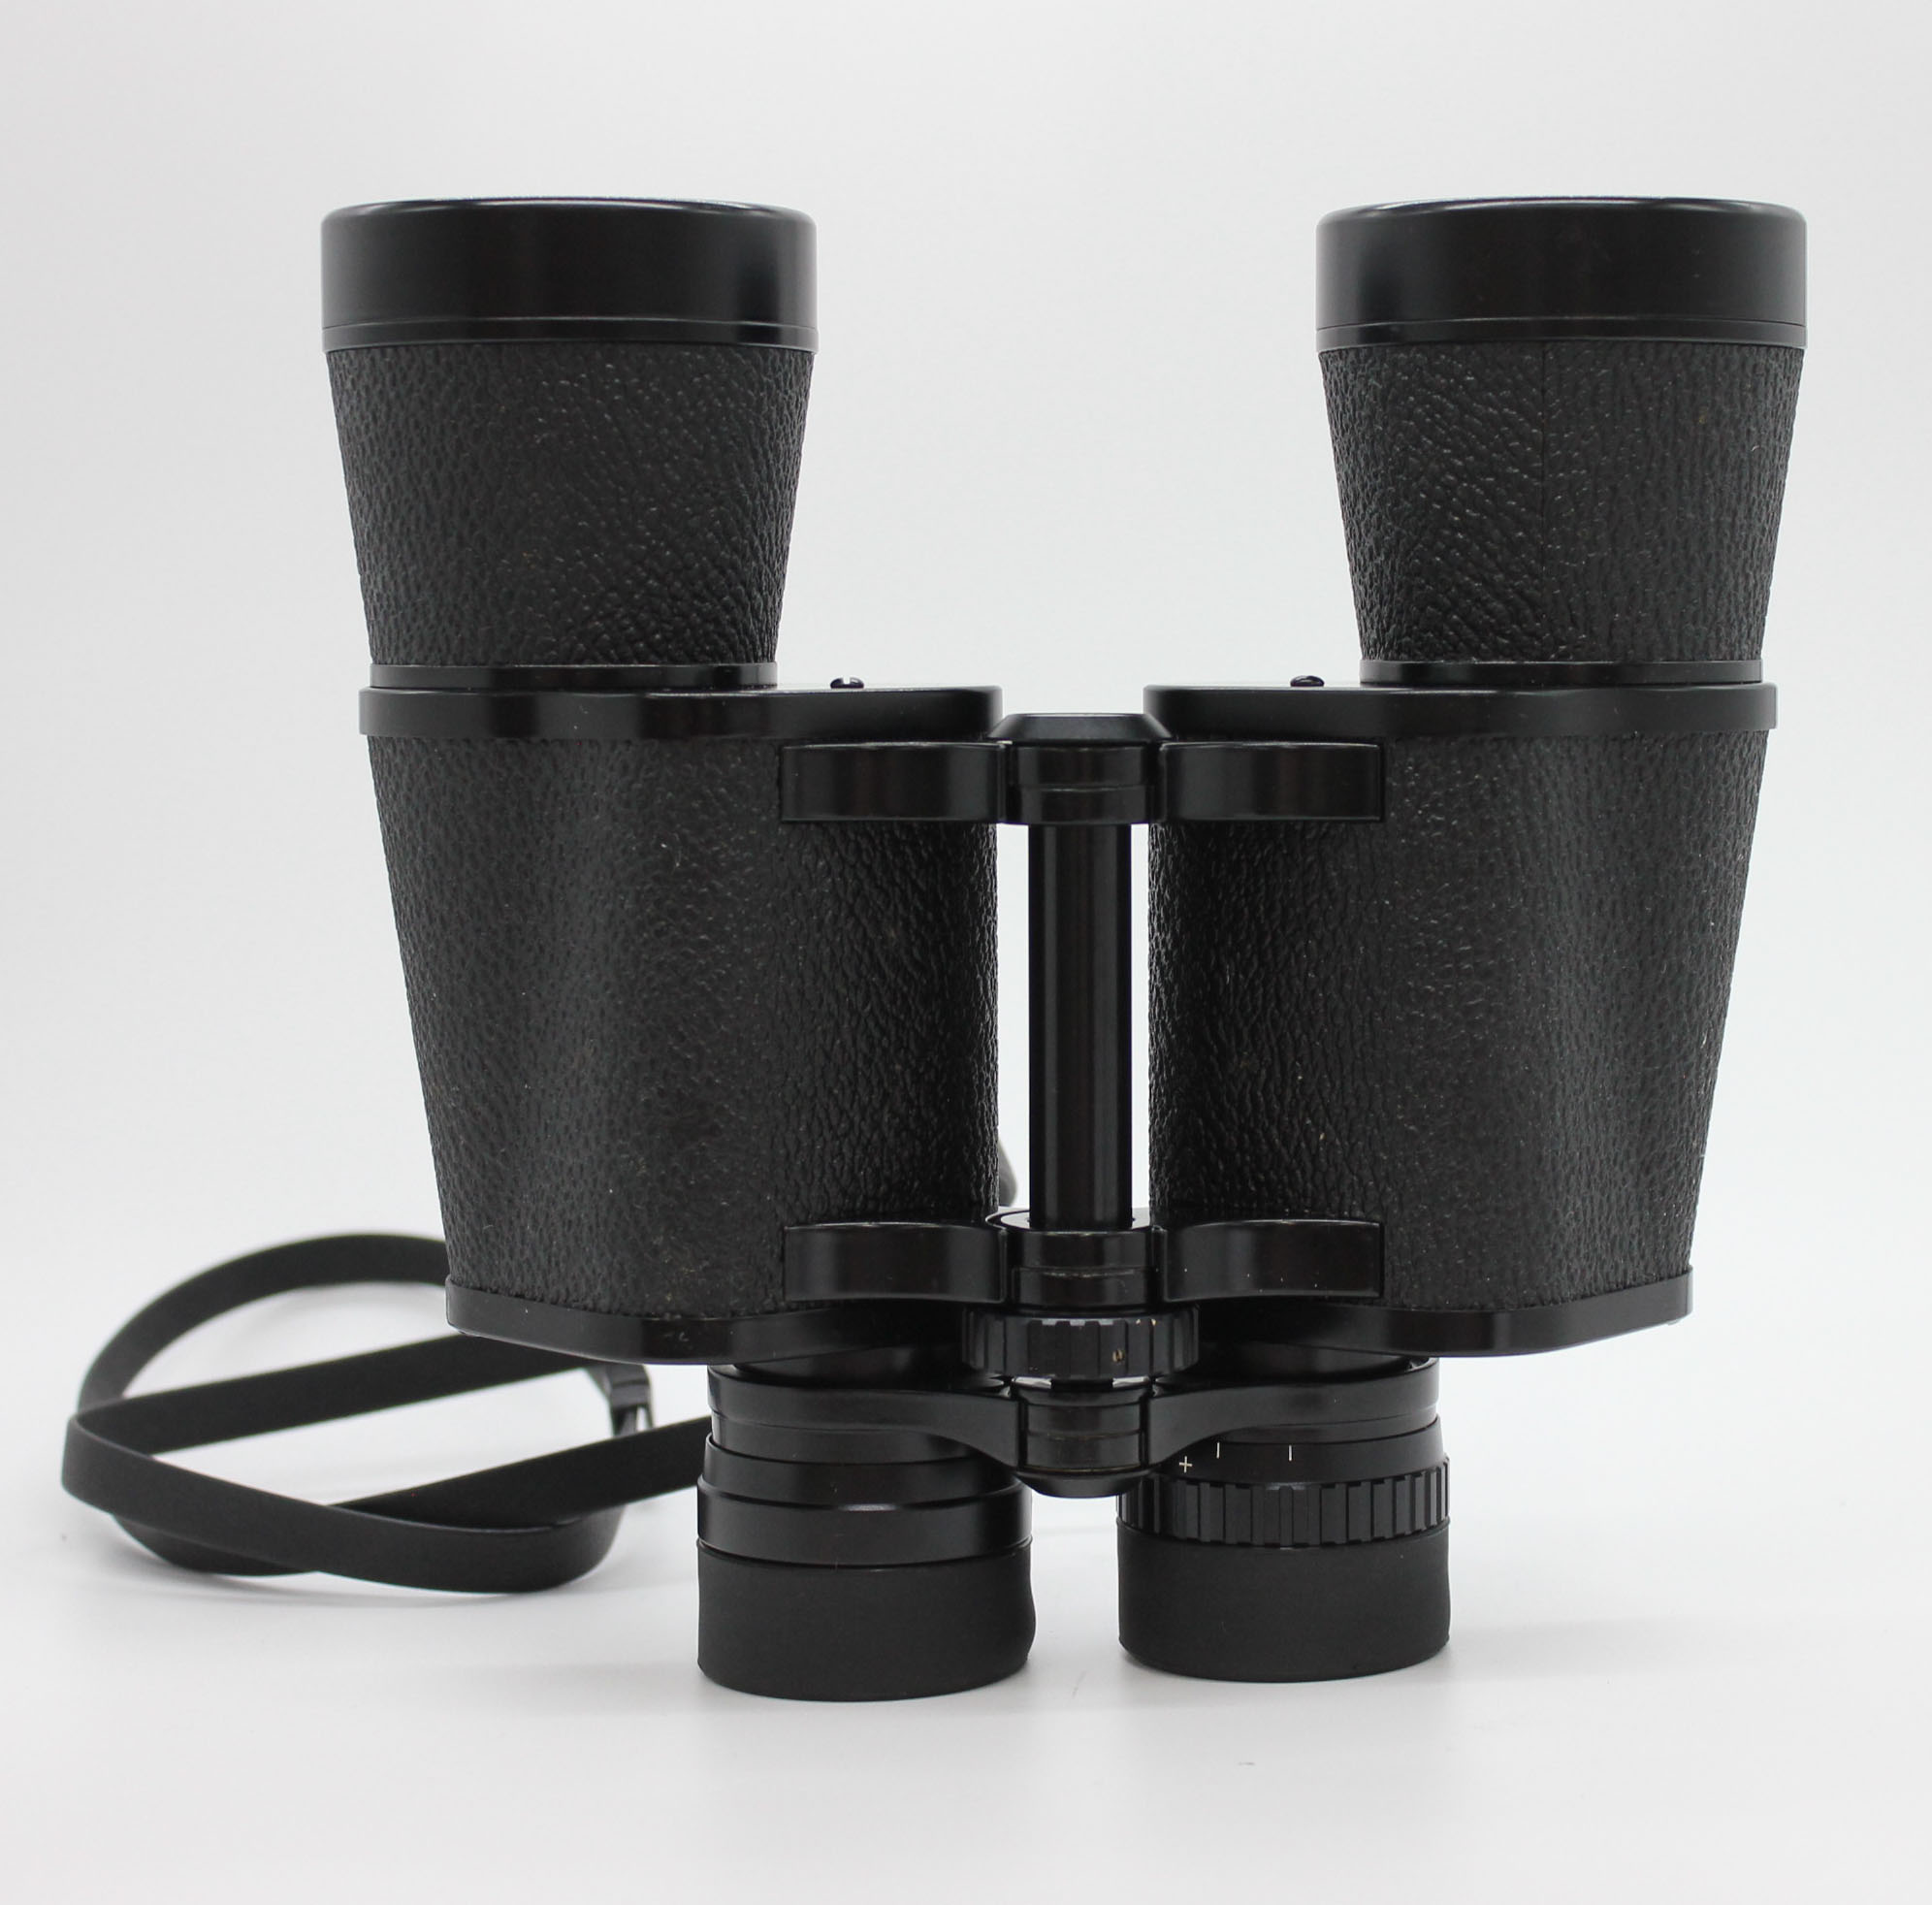  Nikon 7x50 7.3° 7.3 Degree Binoculars with Strap and Case from Japan Photo 3